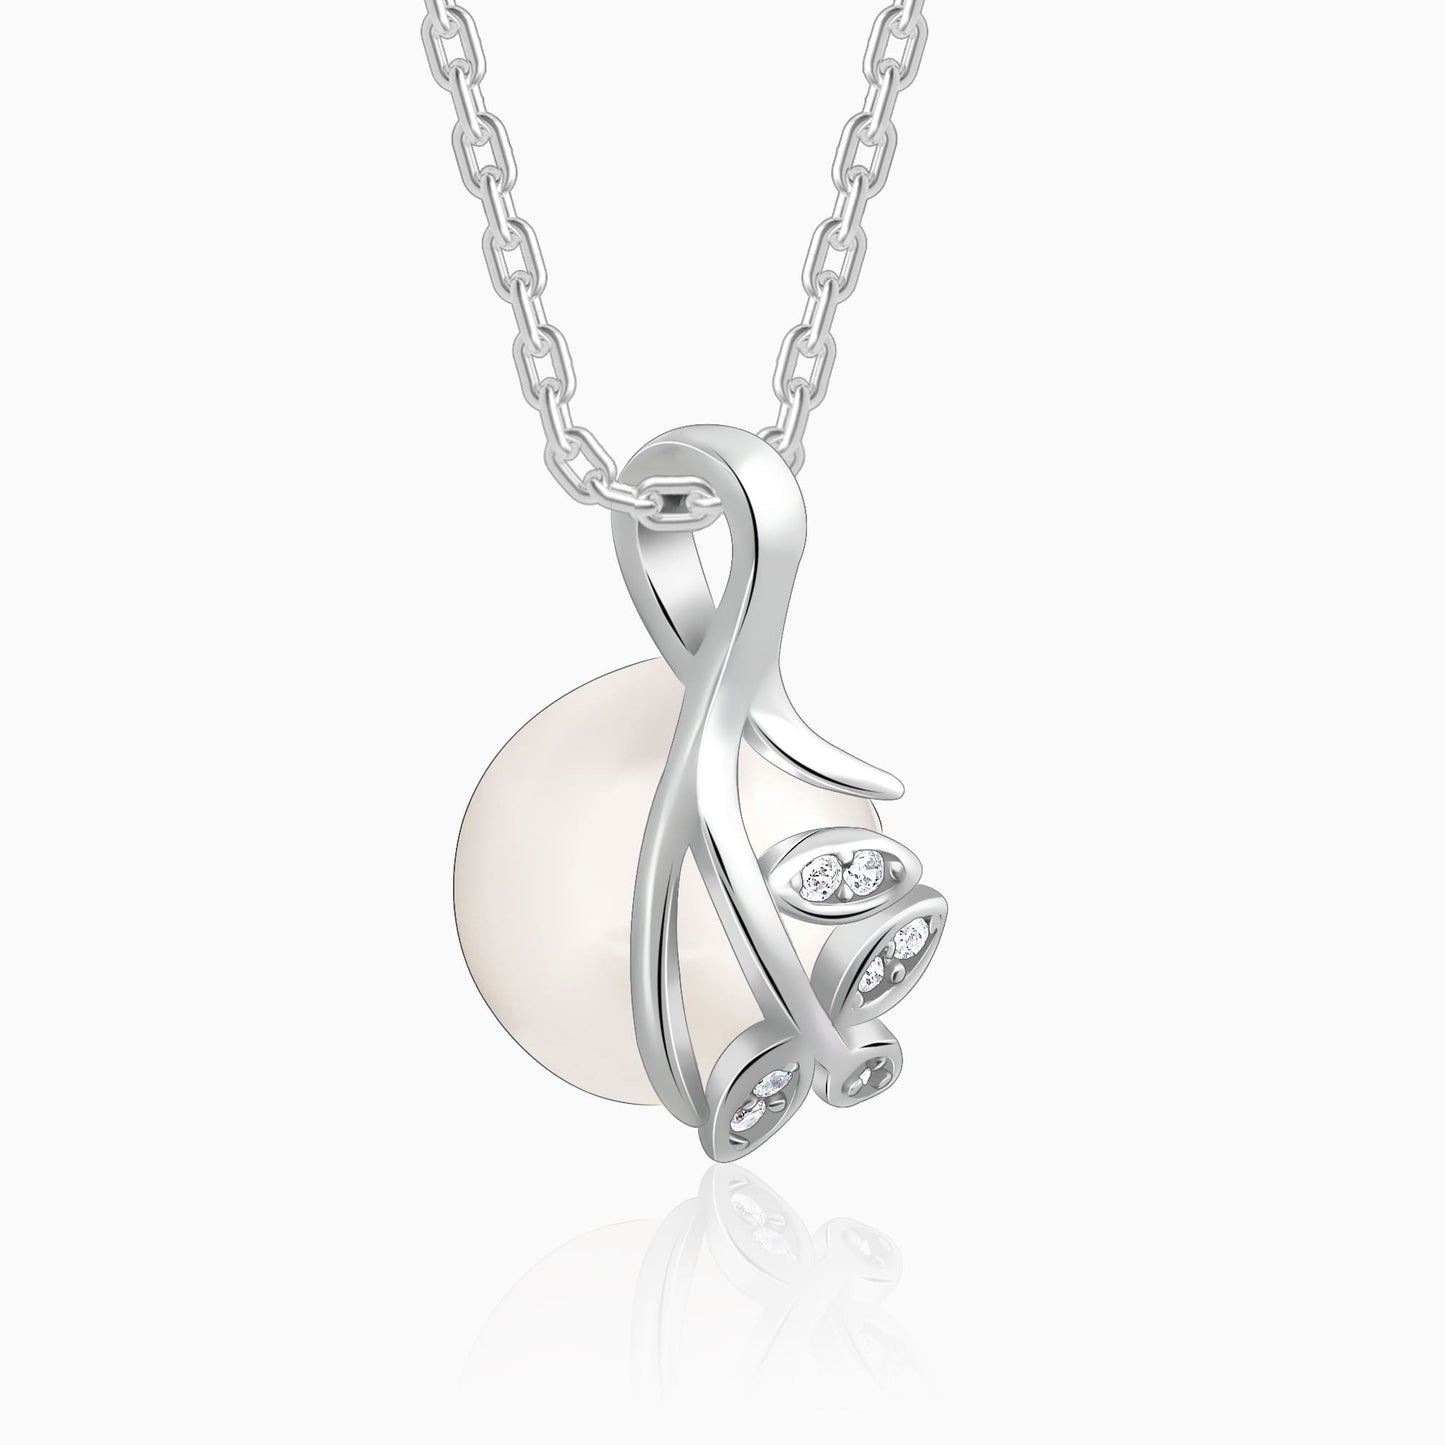 Silver Soul Pearl Pendant With Link Chain